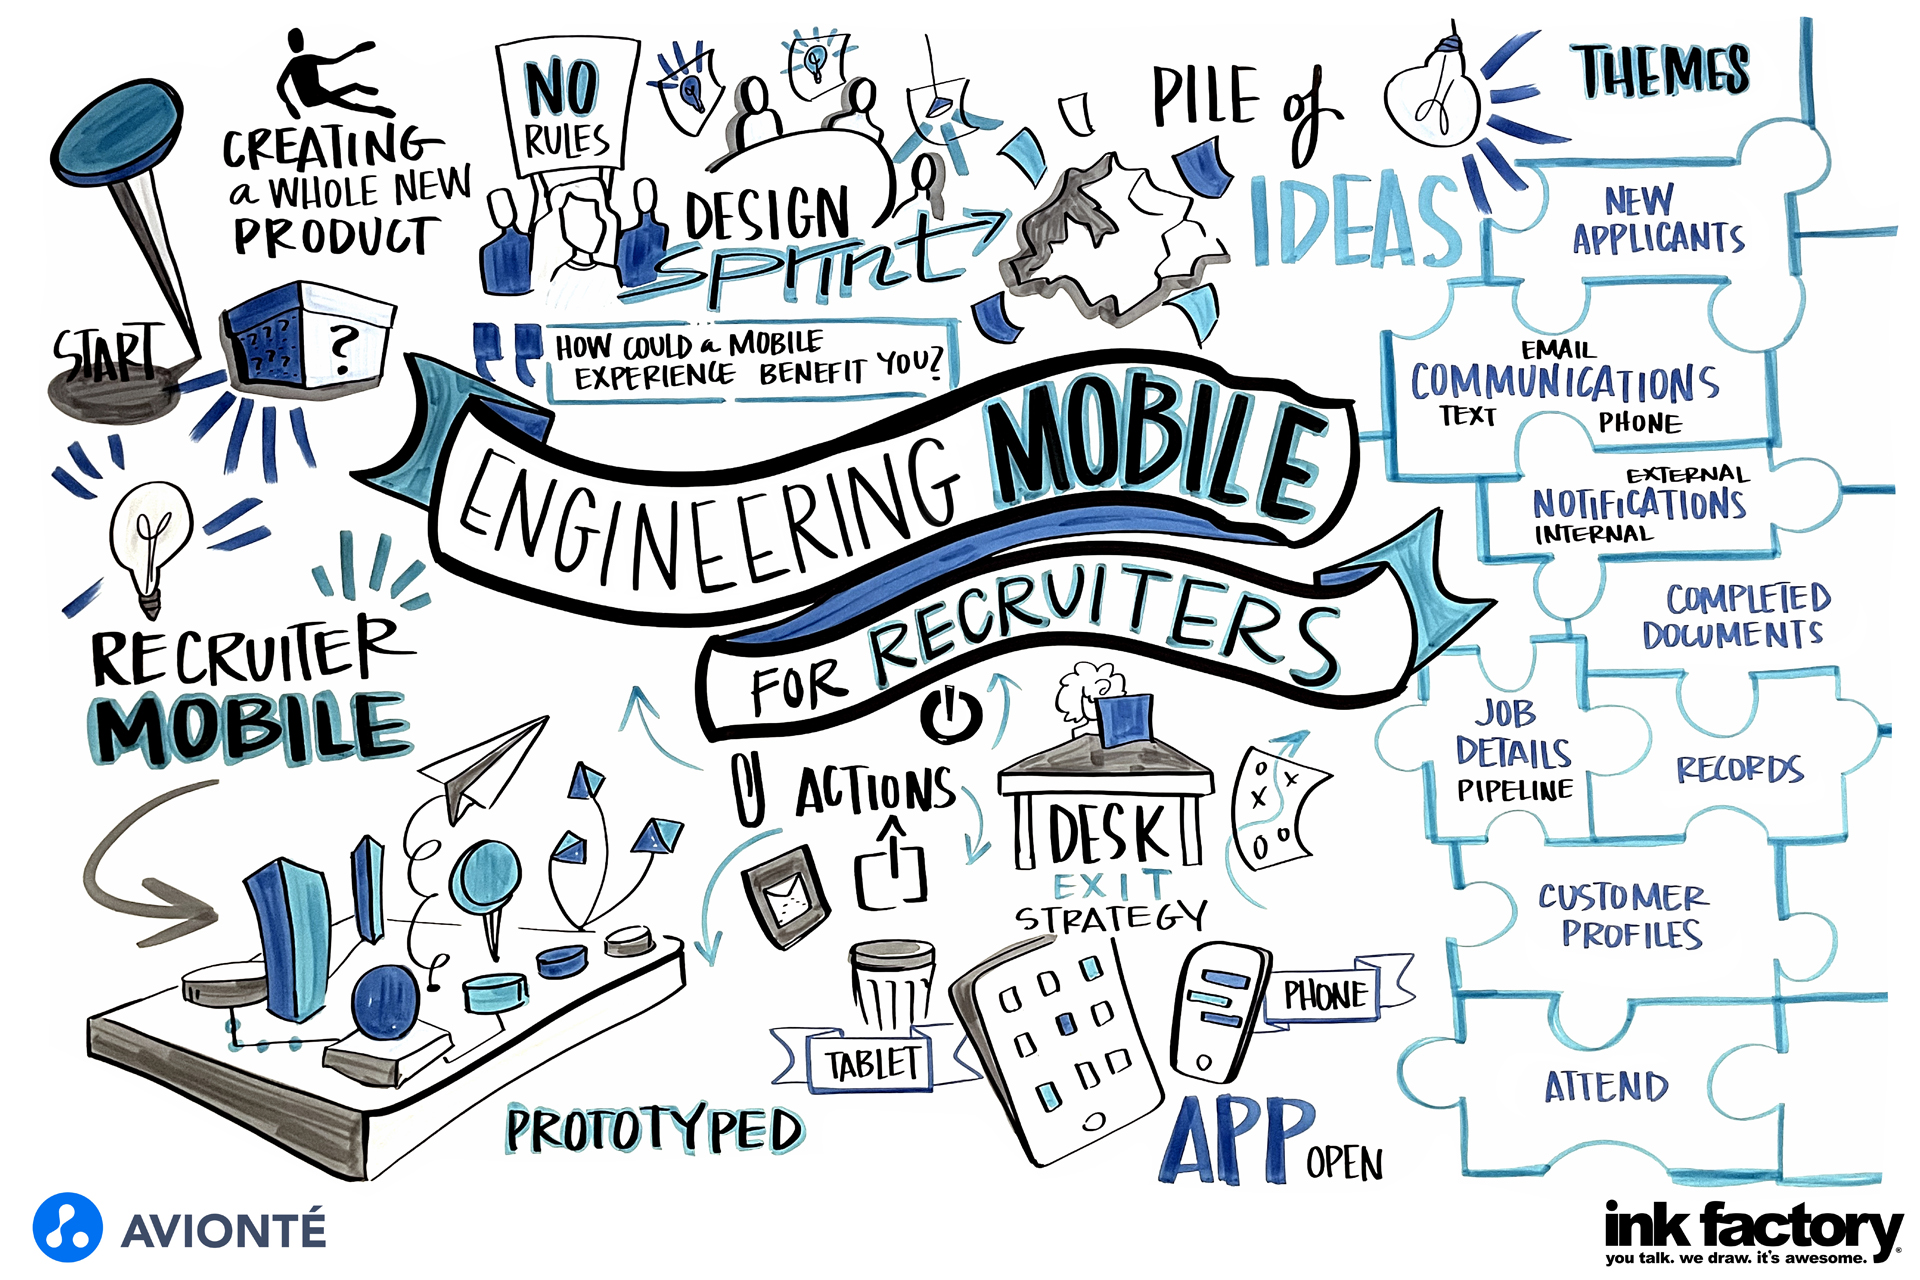 Engineering Mobile for Recruiters, CONNECT 2023 Design Sprint